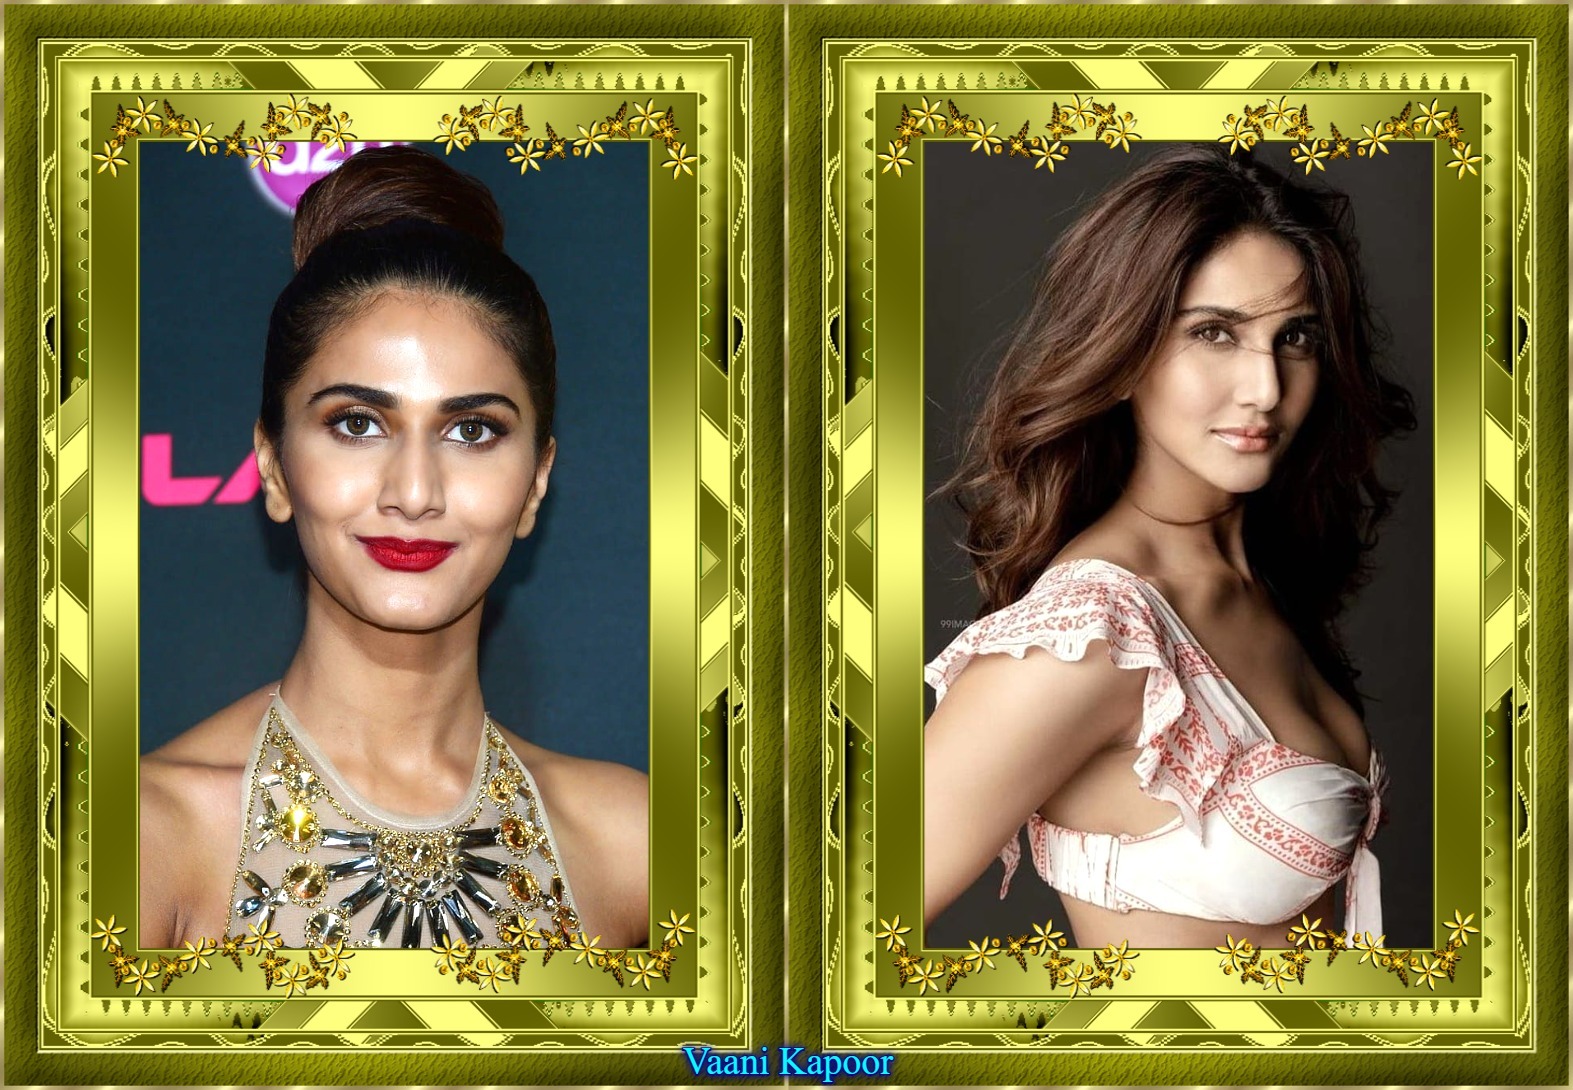 Read more about the article “Vaani Kapoor- In A Bid To Regain Her Lost Steps”